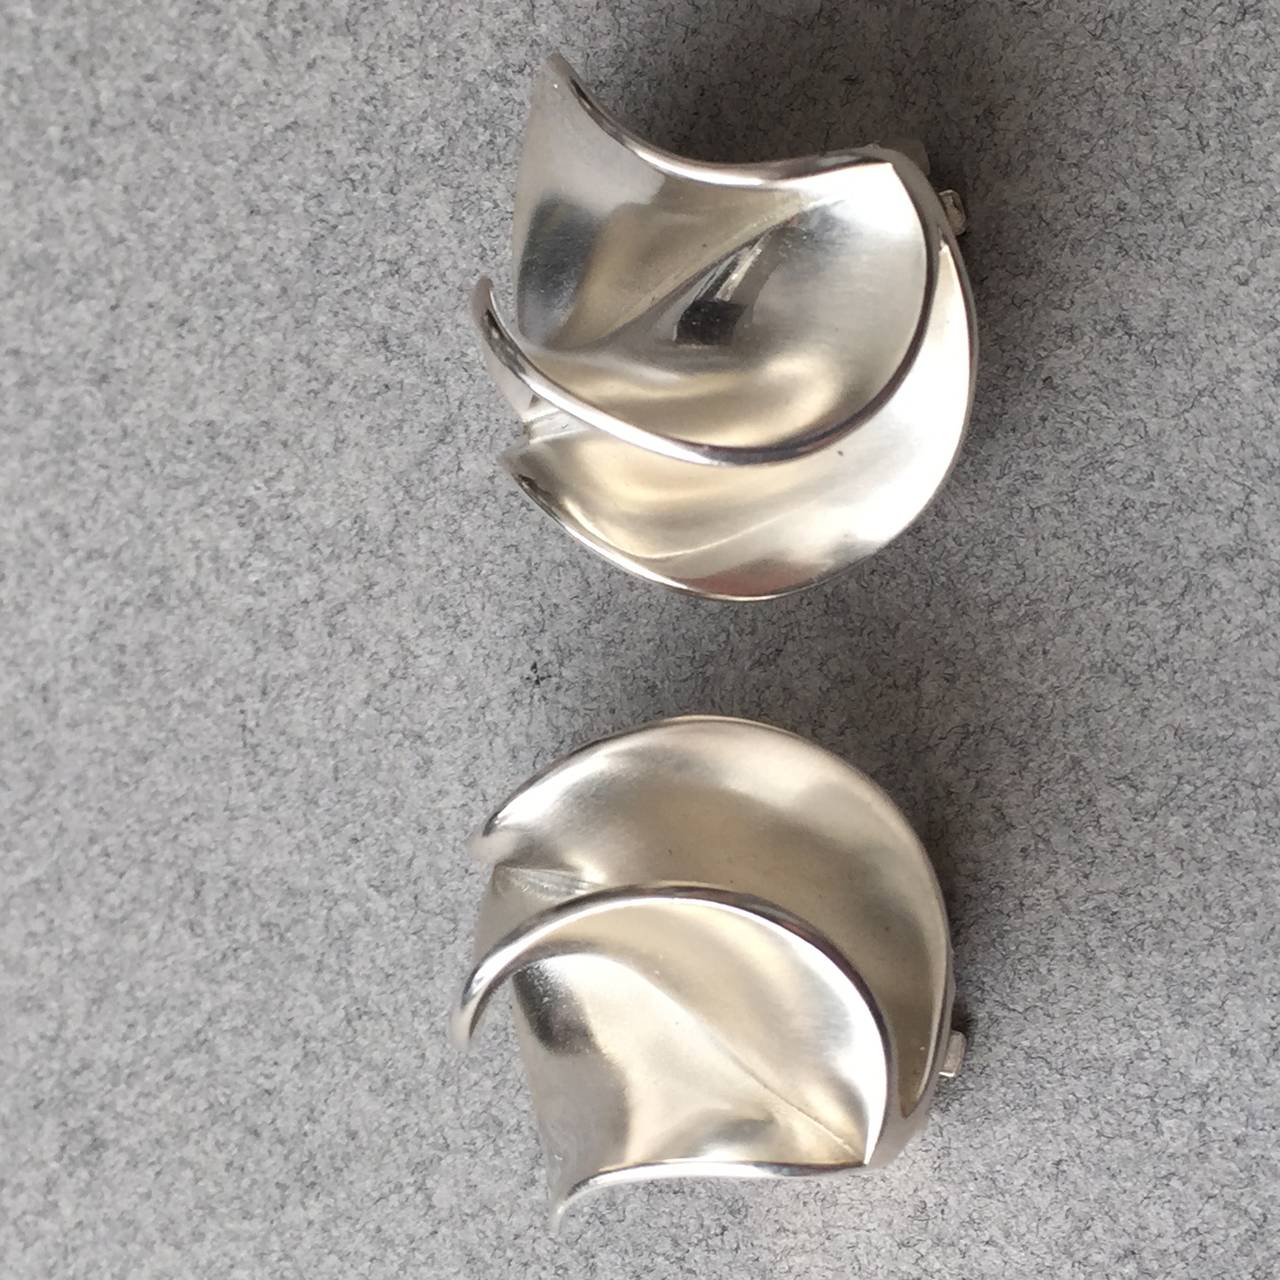 Georg Jensen Modernist Earrings No 367 by Nanna Ditzel

Rare design, beautiful scale. Comfortable clip ons. Post can be added.

Sterling Silver

Denmark